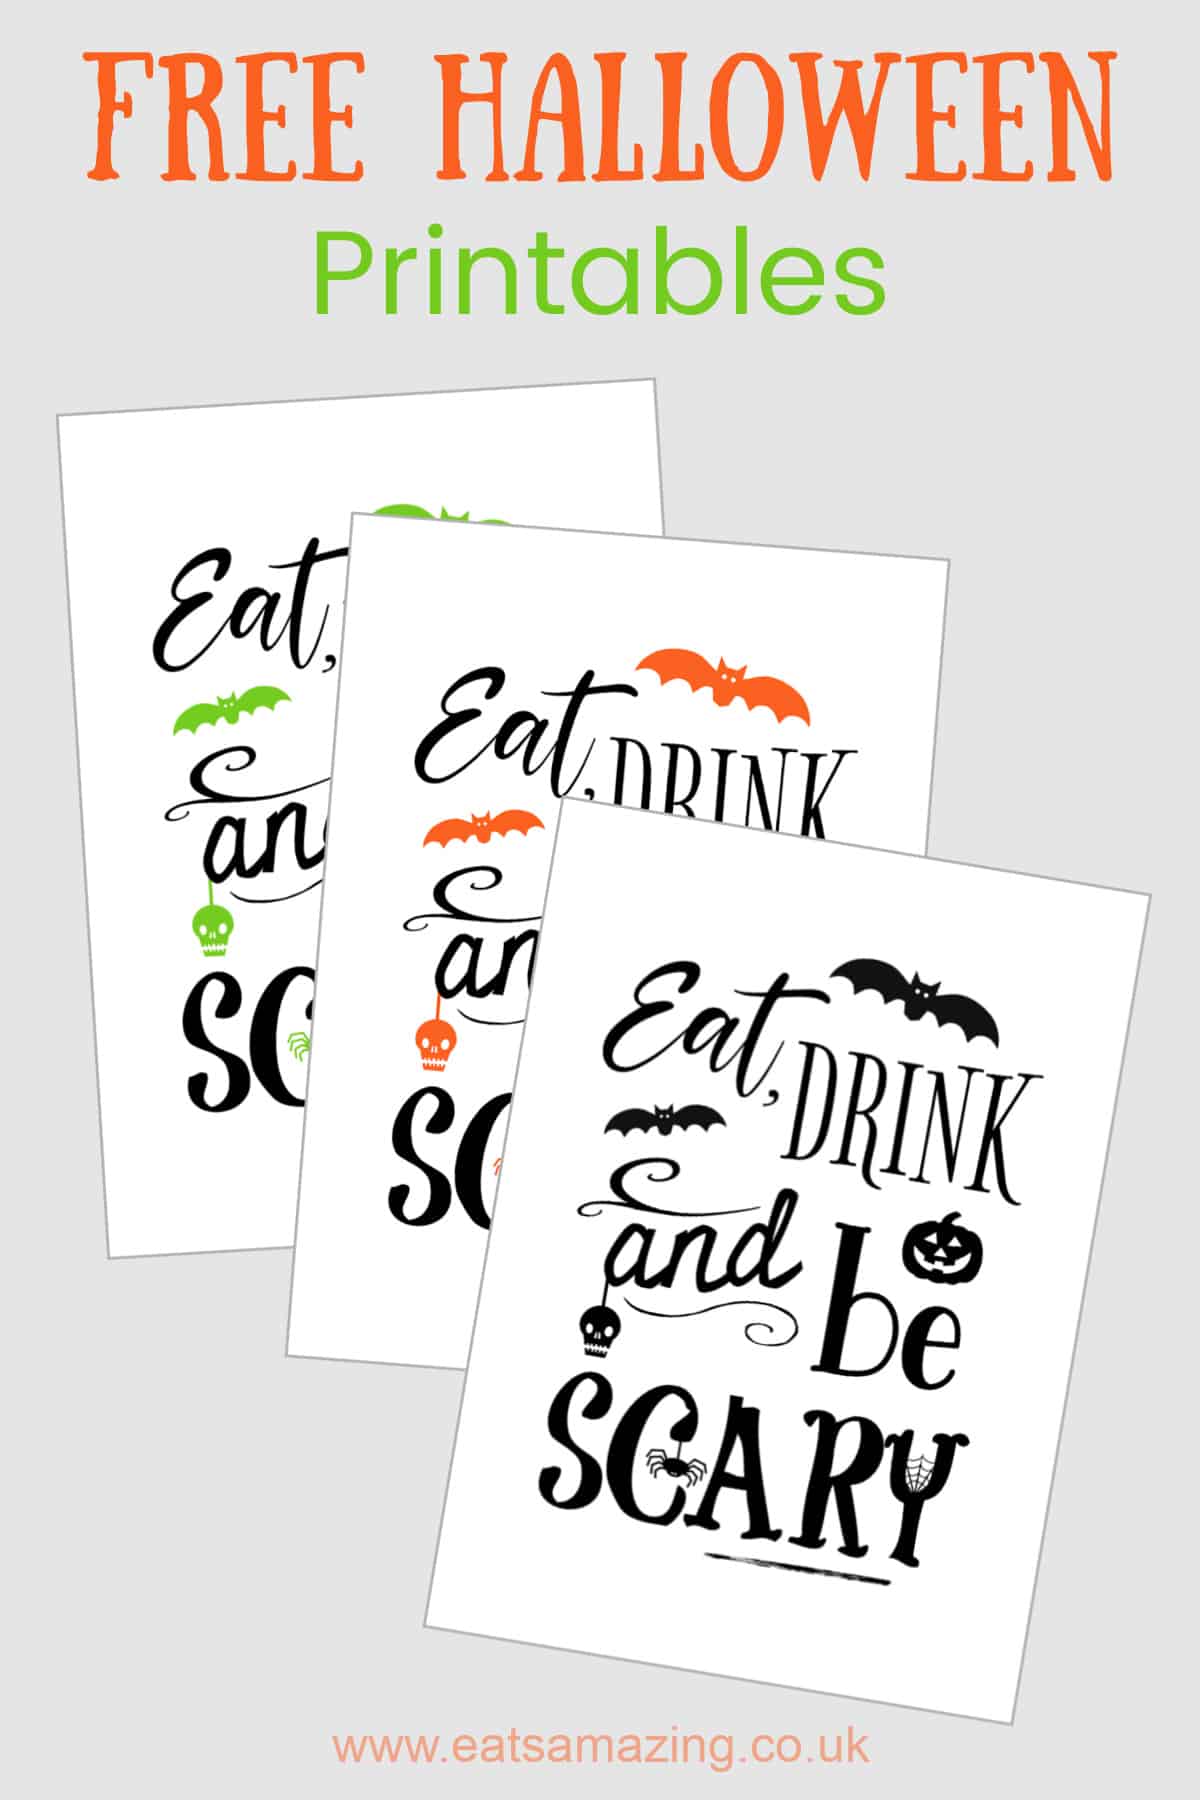 FREE Halloween prints to download with Halloween quote Eat Drink and Be Scary - great for decorating your house or party table